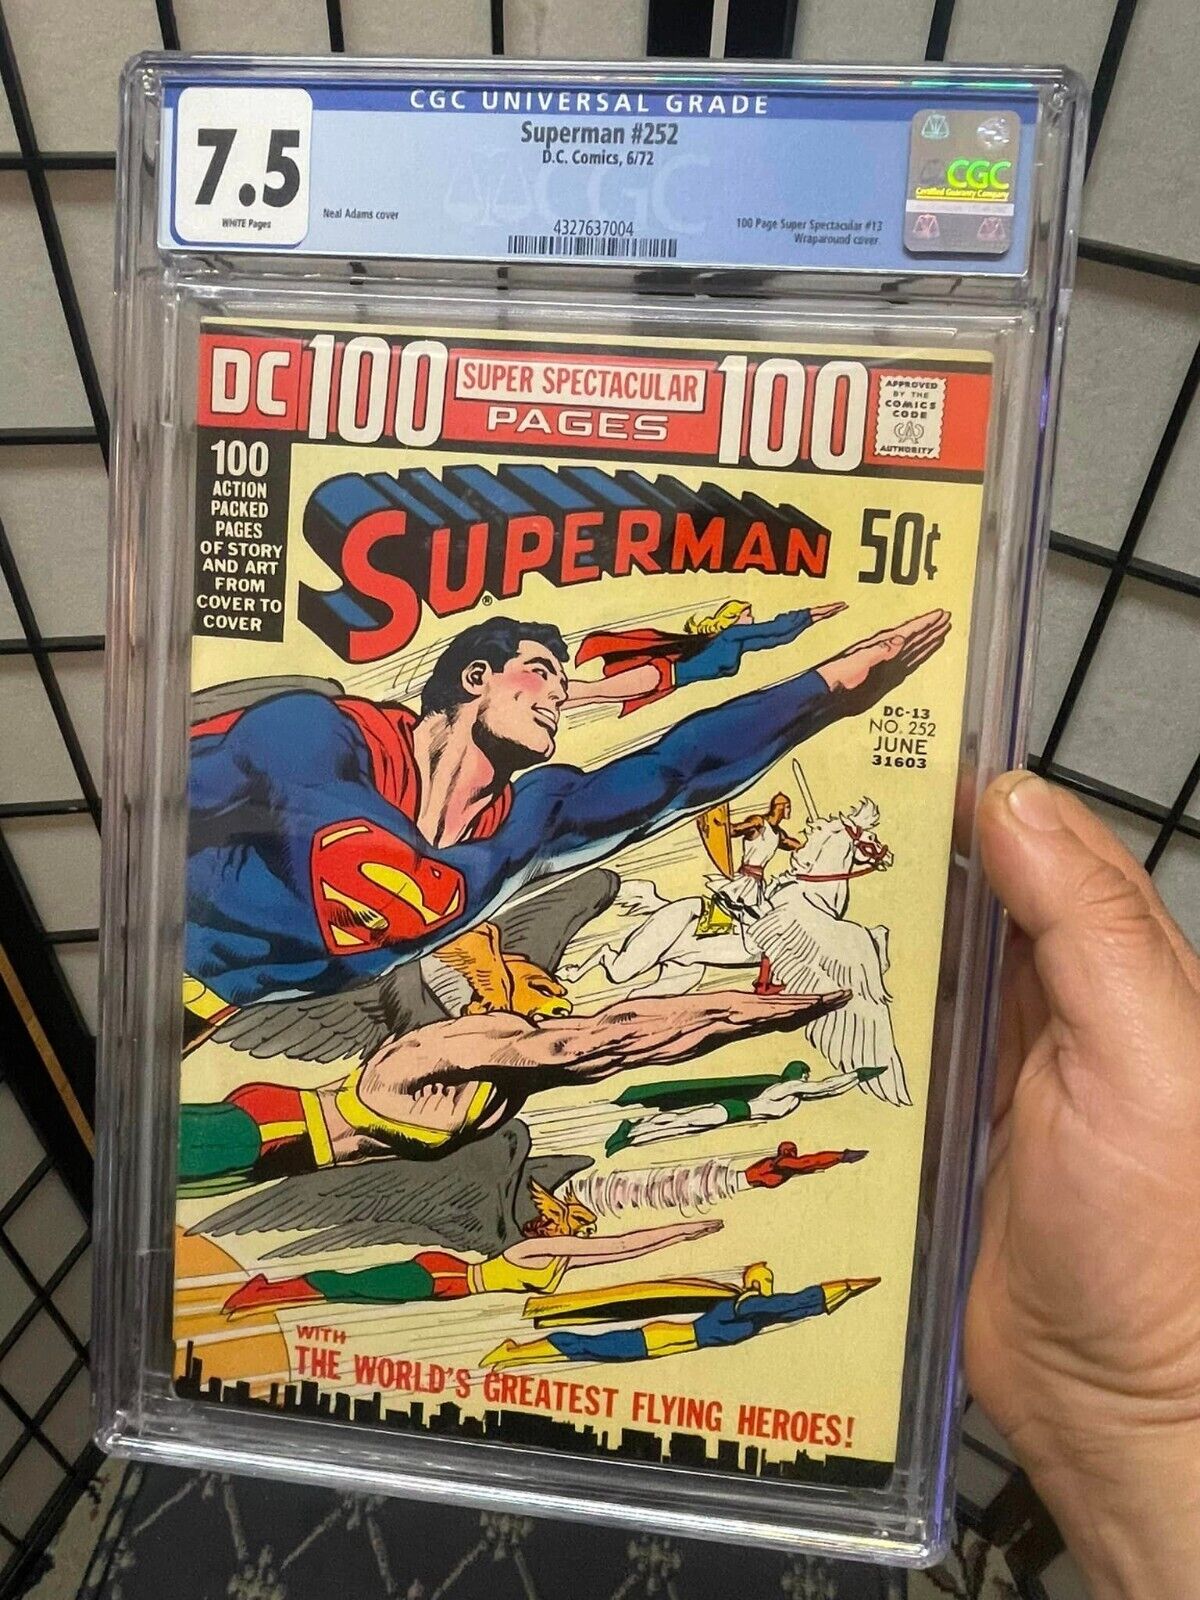 Superman #252 (CGC 7.5 - DC 1972) 100 Pages. Wraparound Cover. Neal Adams.